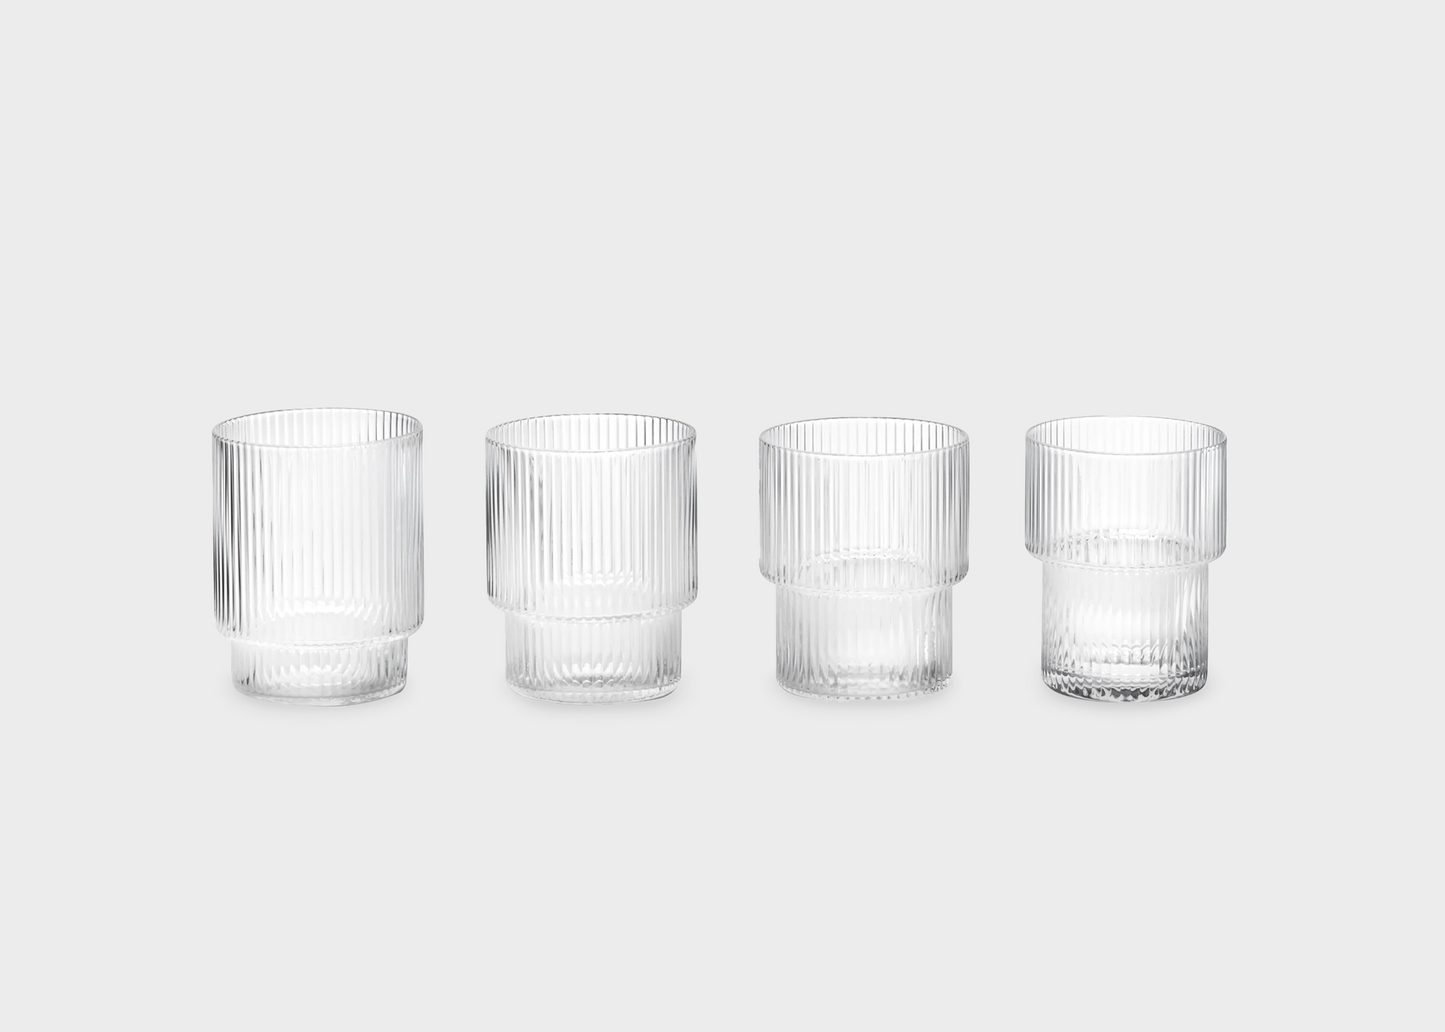 https://cdn.shopify.com/s/files/1/0563/8992/6982/products/small_ripple_glasses_clear_1445x.png?v=1675389104